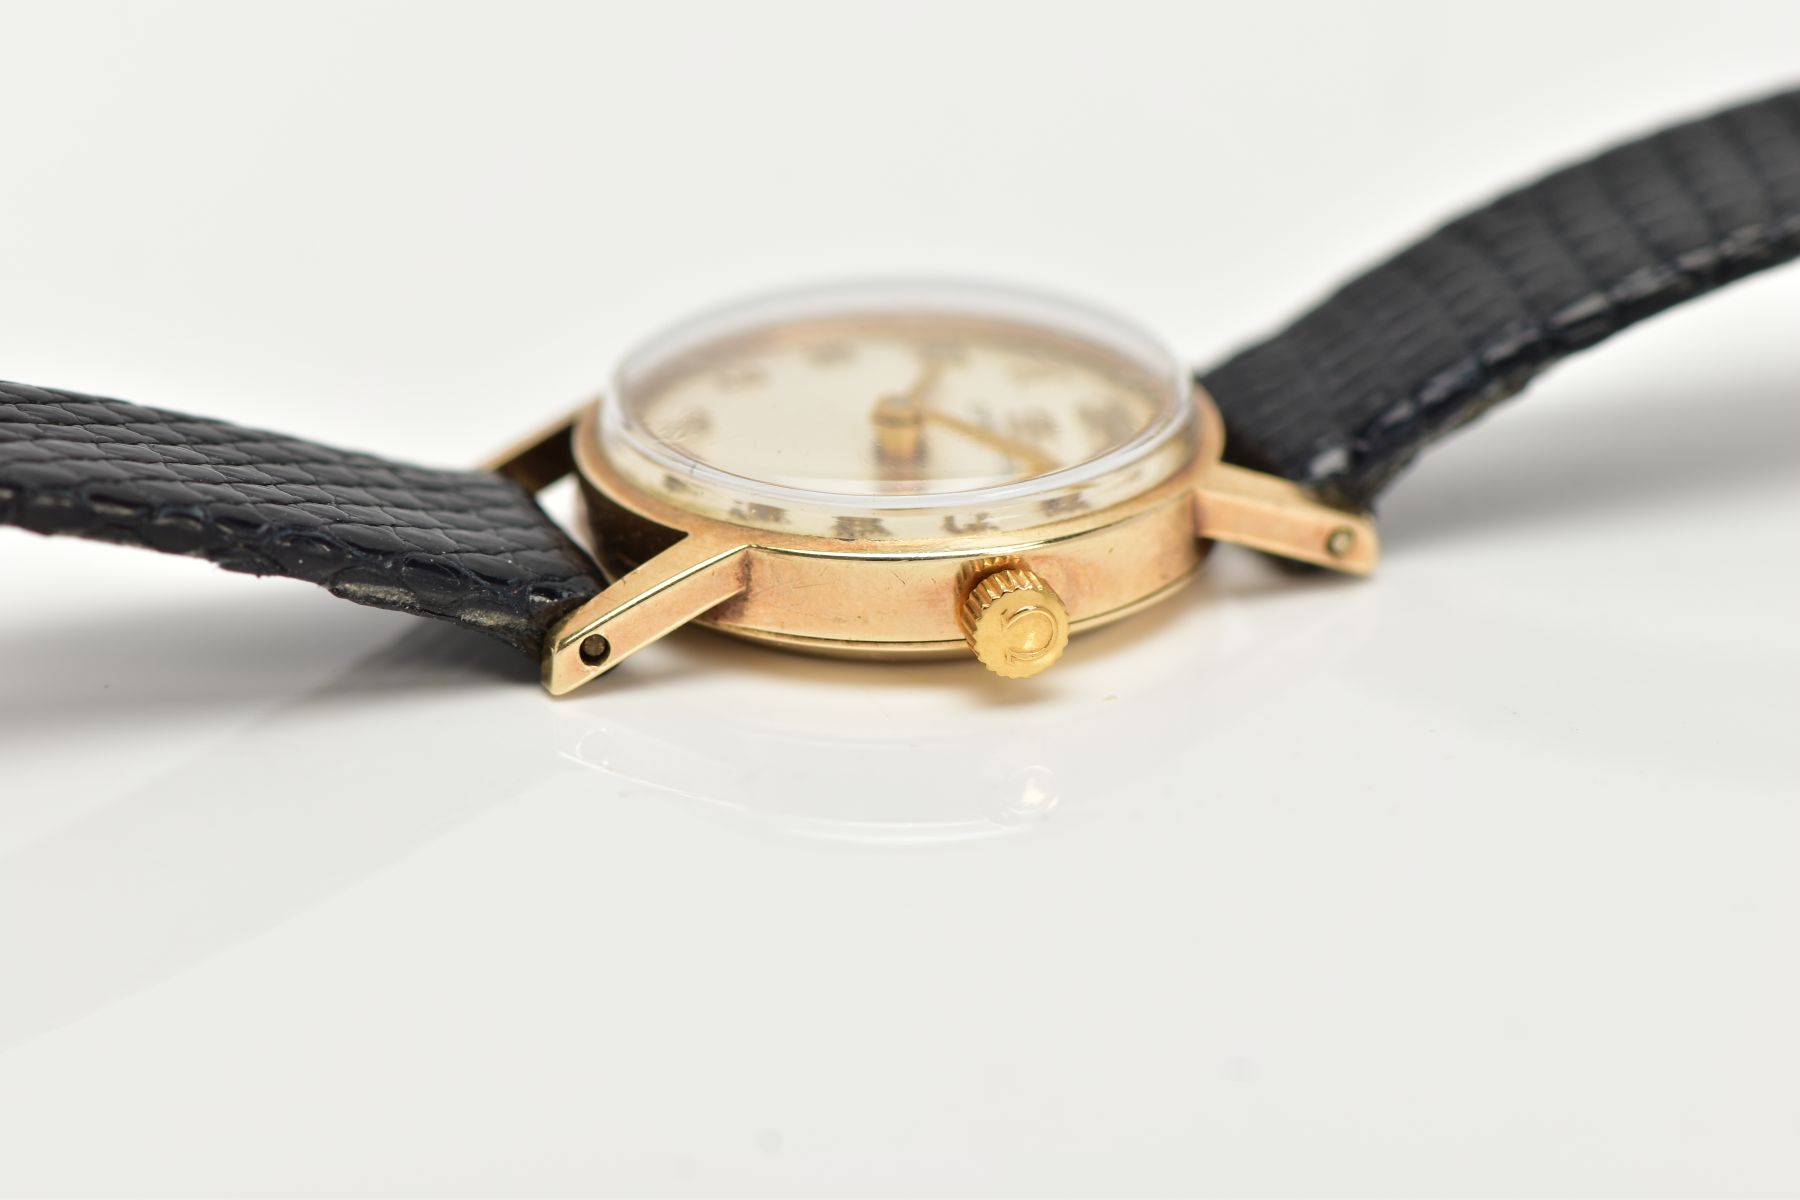 A LADIES 9CT GOLD 'OMEGA' WRISTWATCH, circa 1960's, hand wound movement, round champagne dial signed - Image 6 of 6